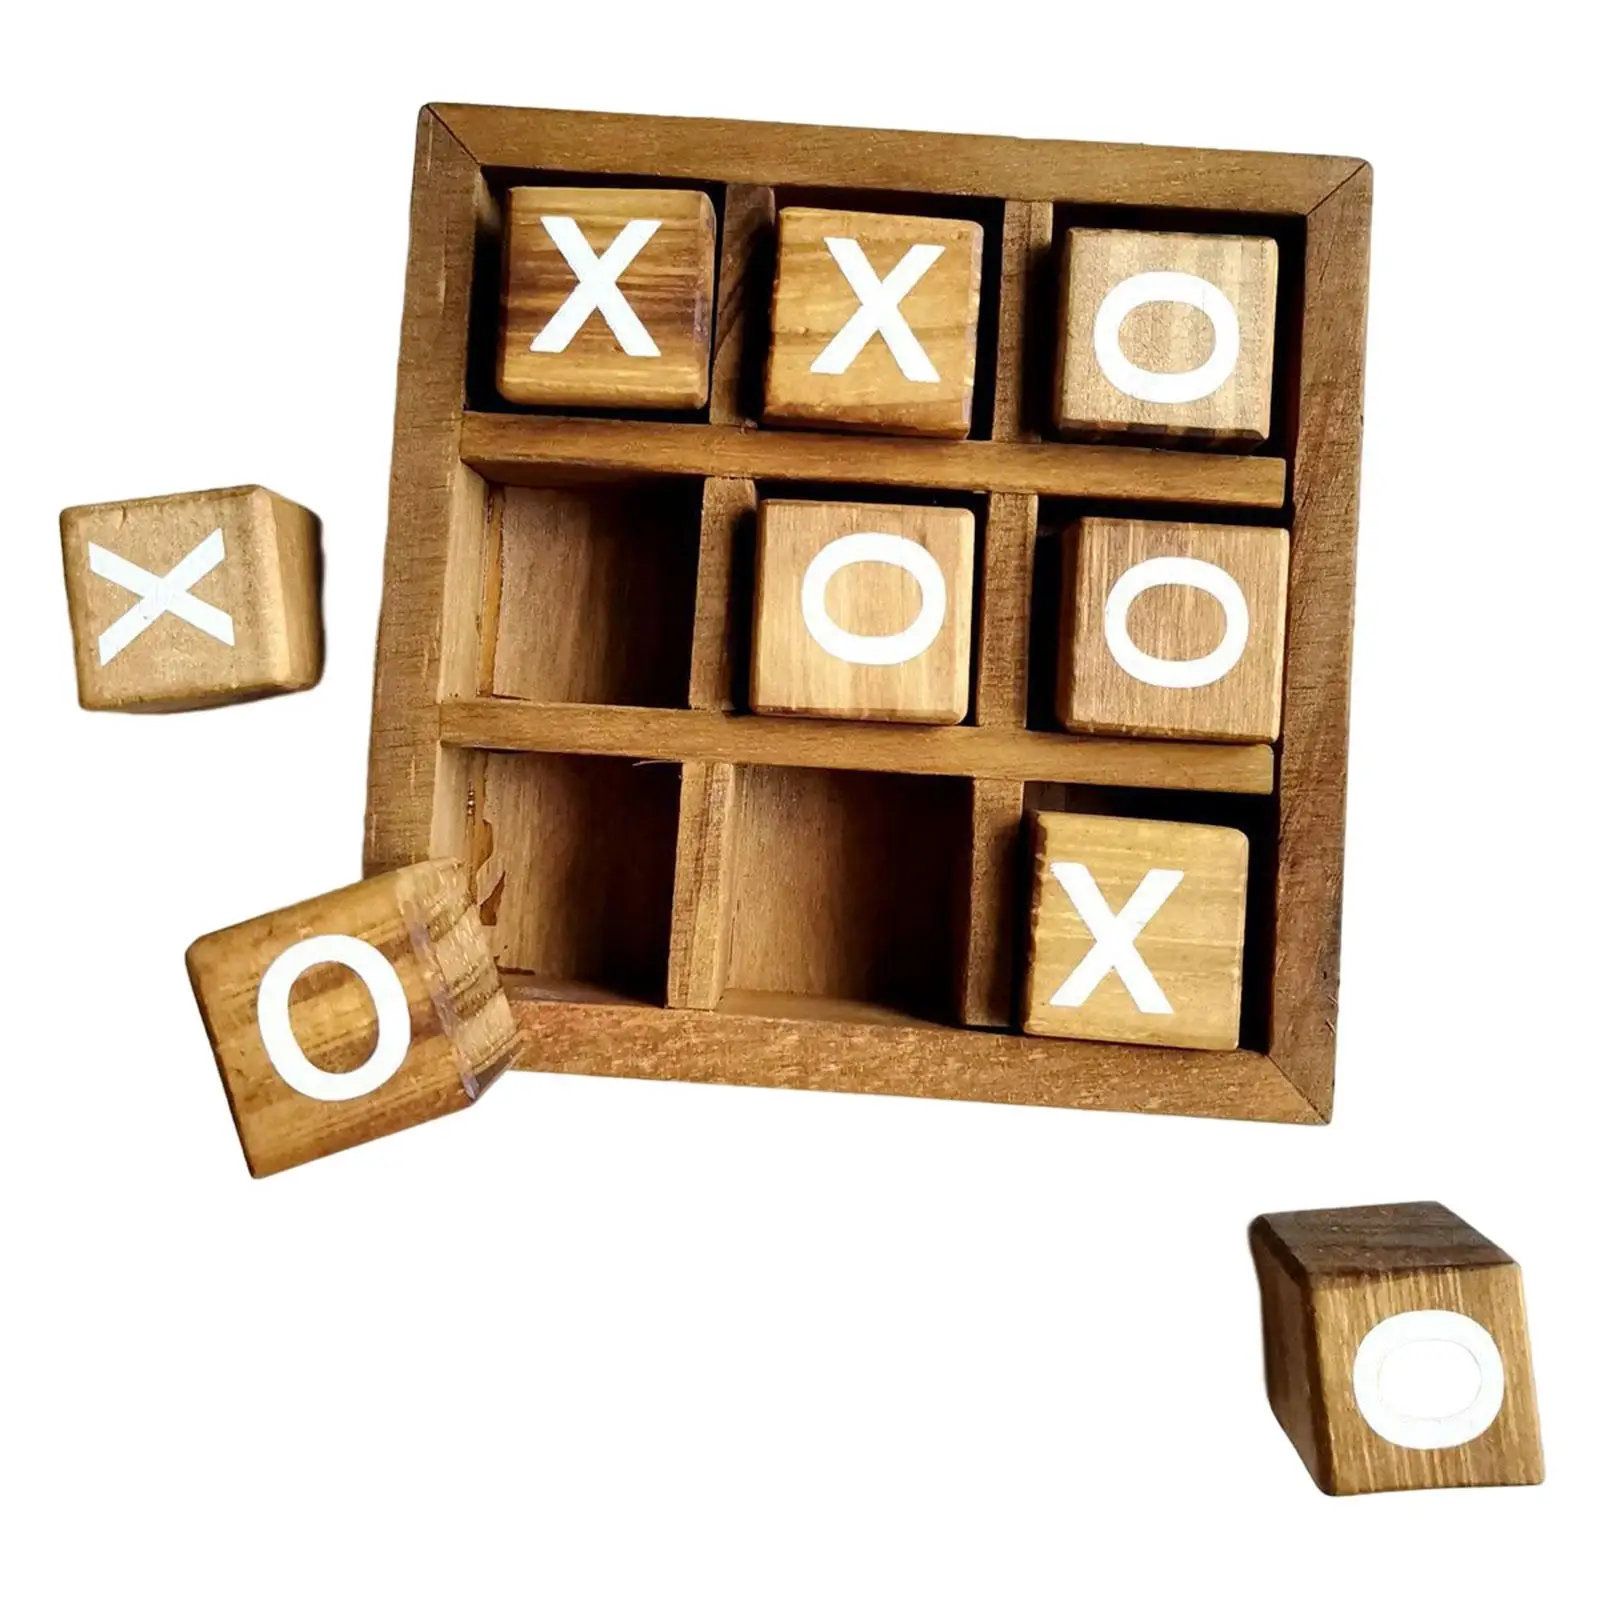 Wooden Tic TAC Toe Game Table Games Party Favor Fun Indoor Brain Teaser Travel for Living Room Kids Adults